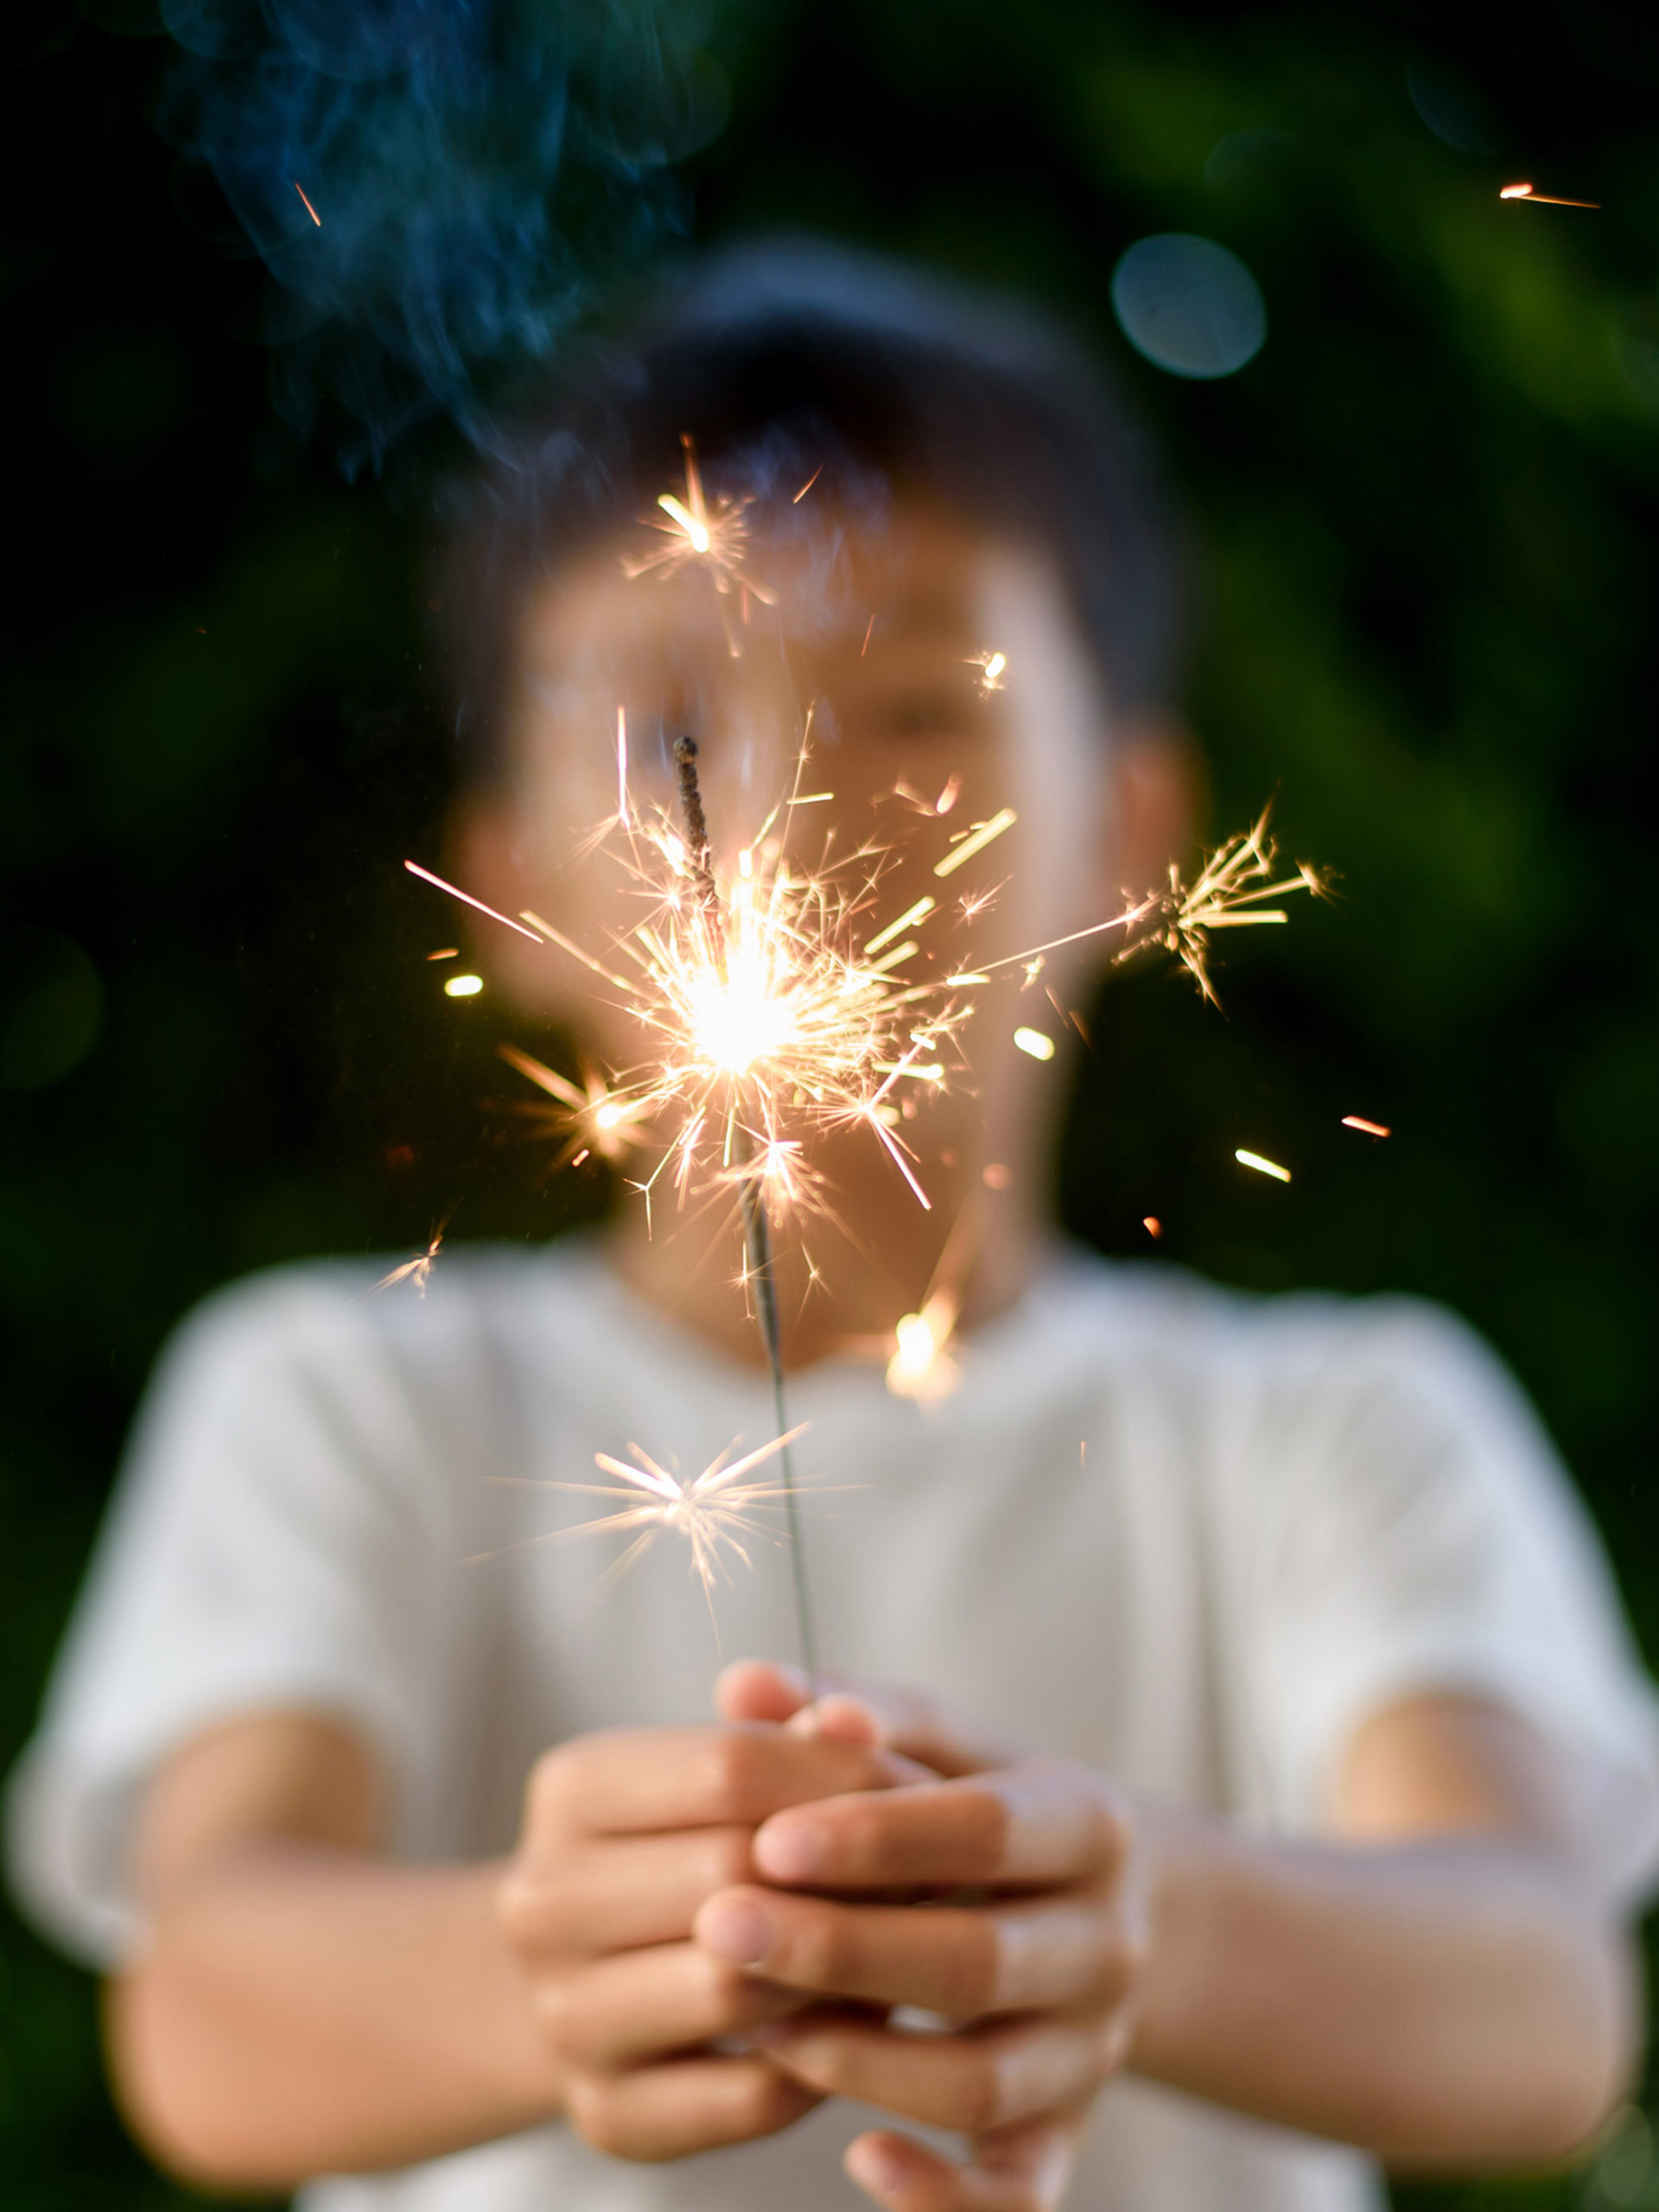 Fourth of July fireworks safety tips for families